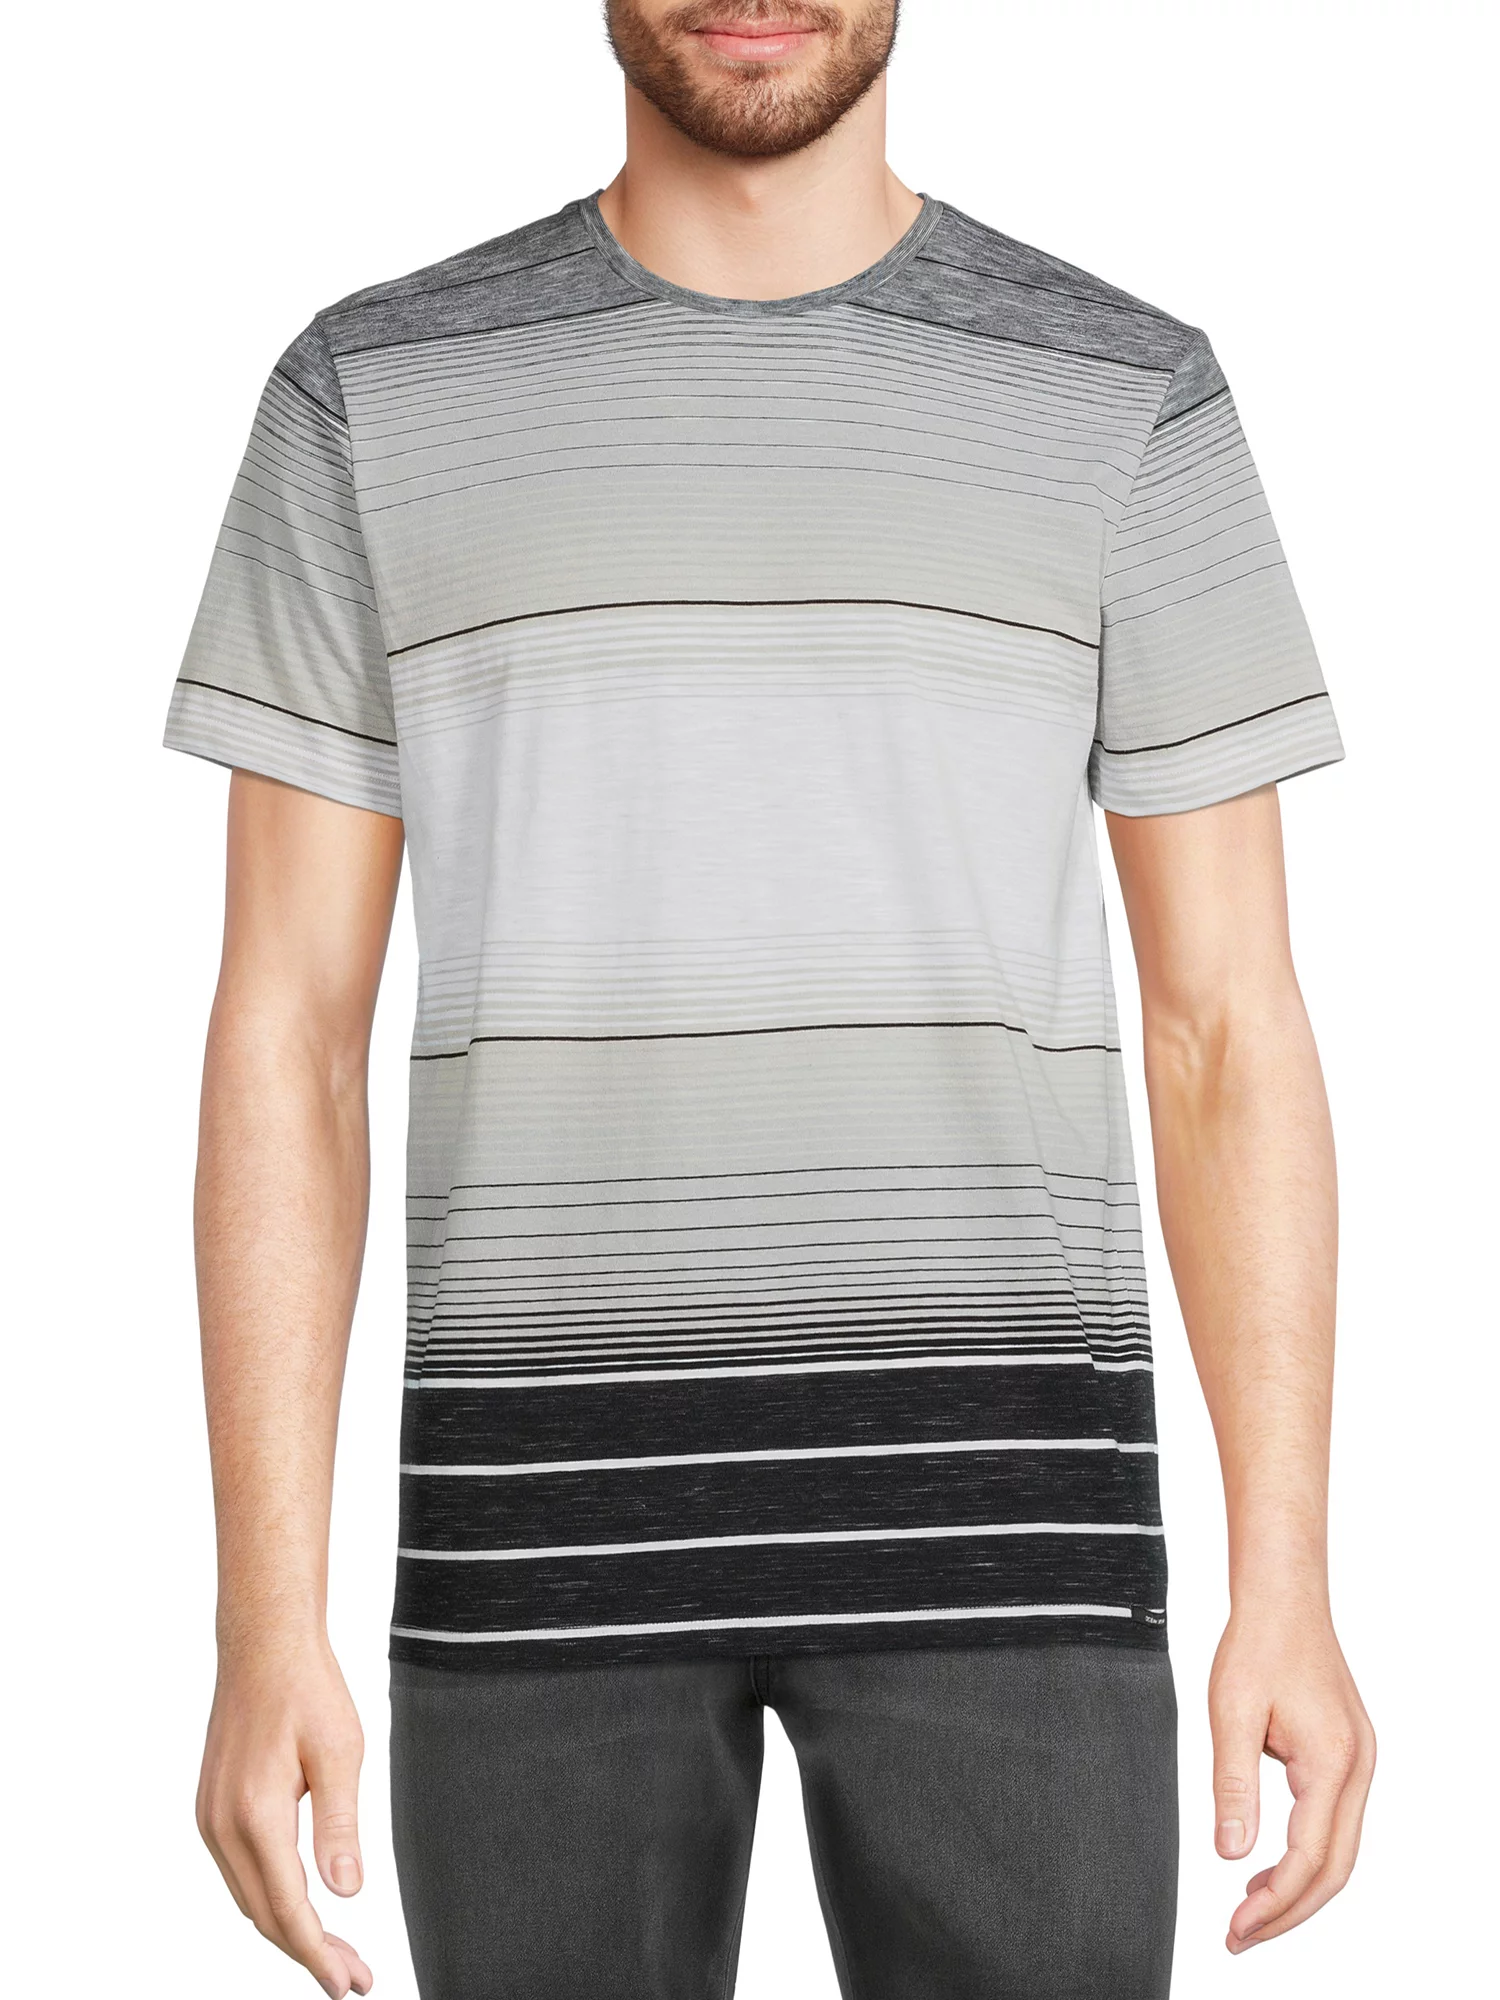 Men's Striped T Shirt With Short Sleeves